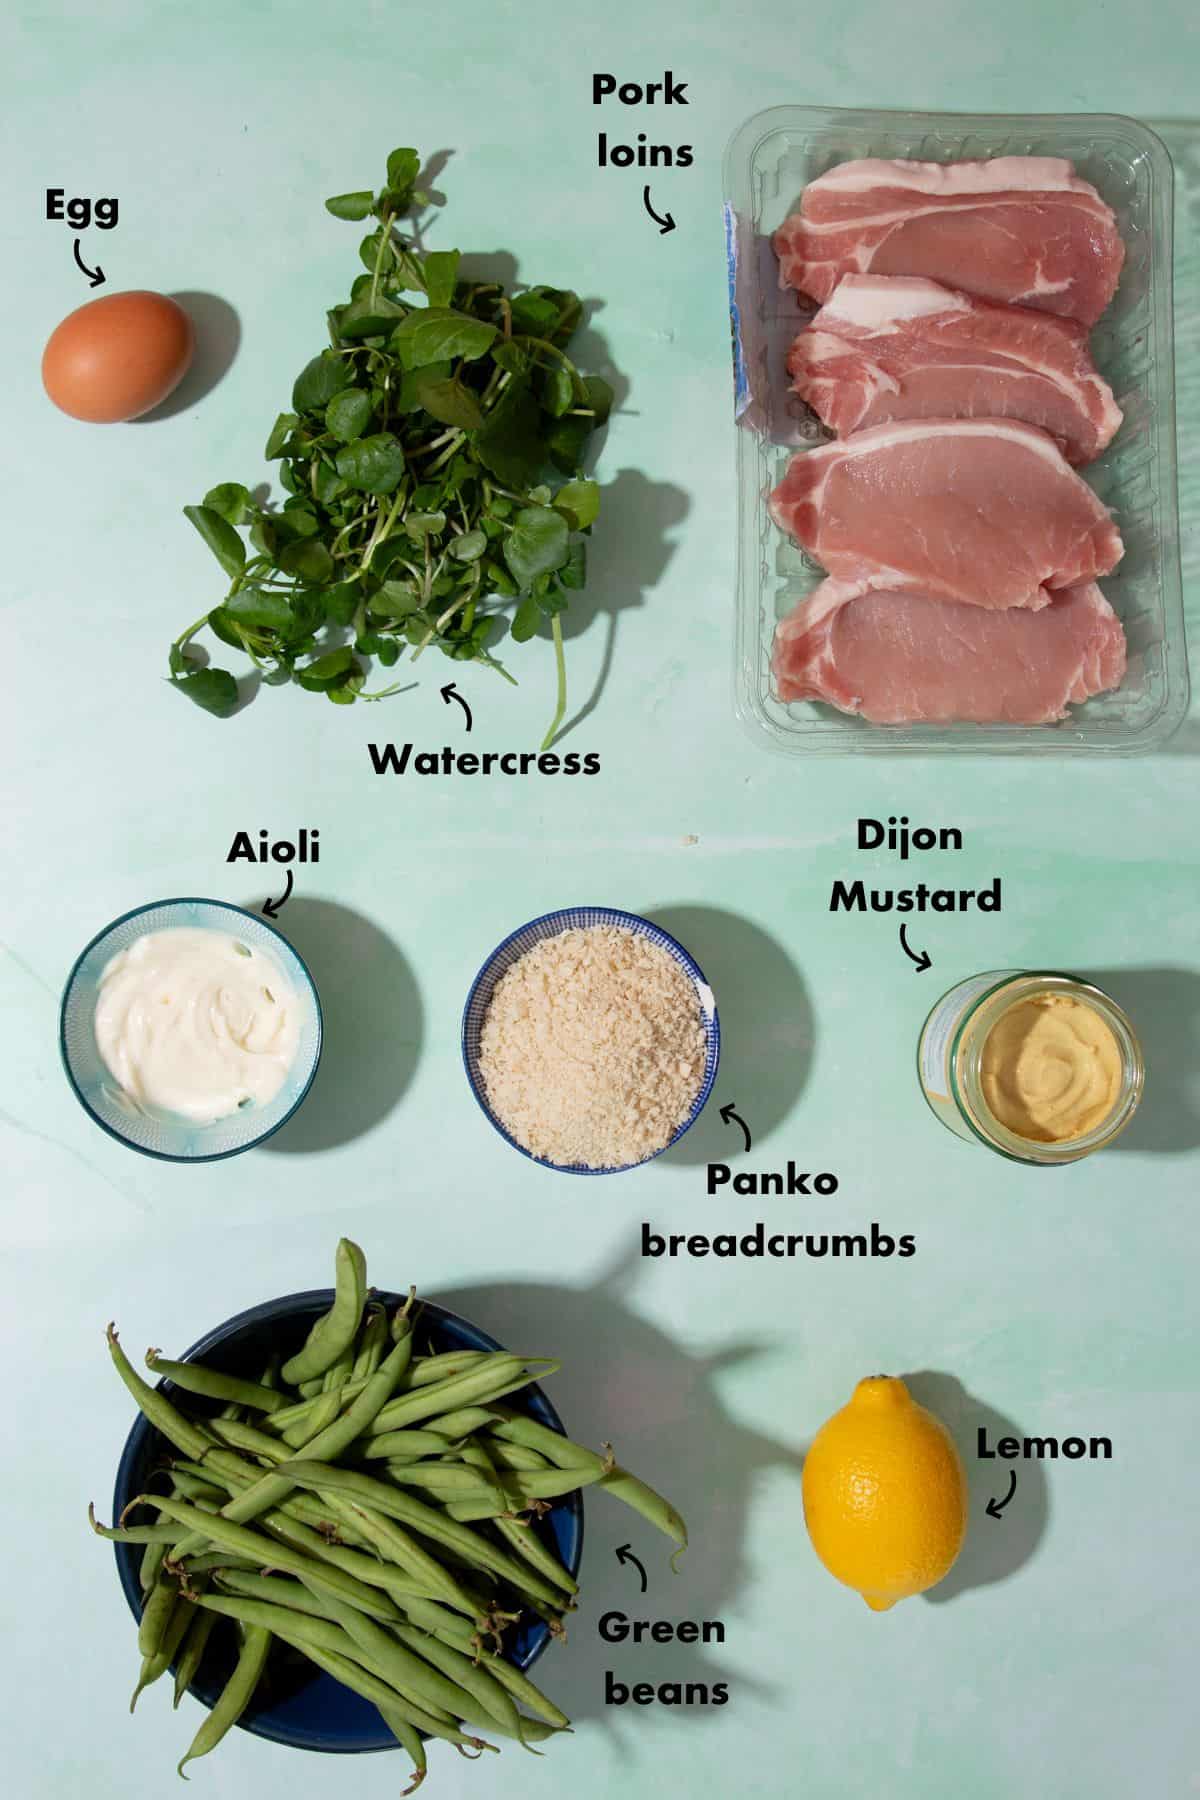 Ingrients to make pork recipe laid out on a pale blue background and labelled.